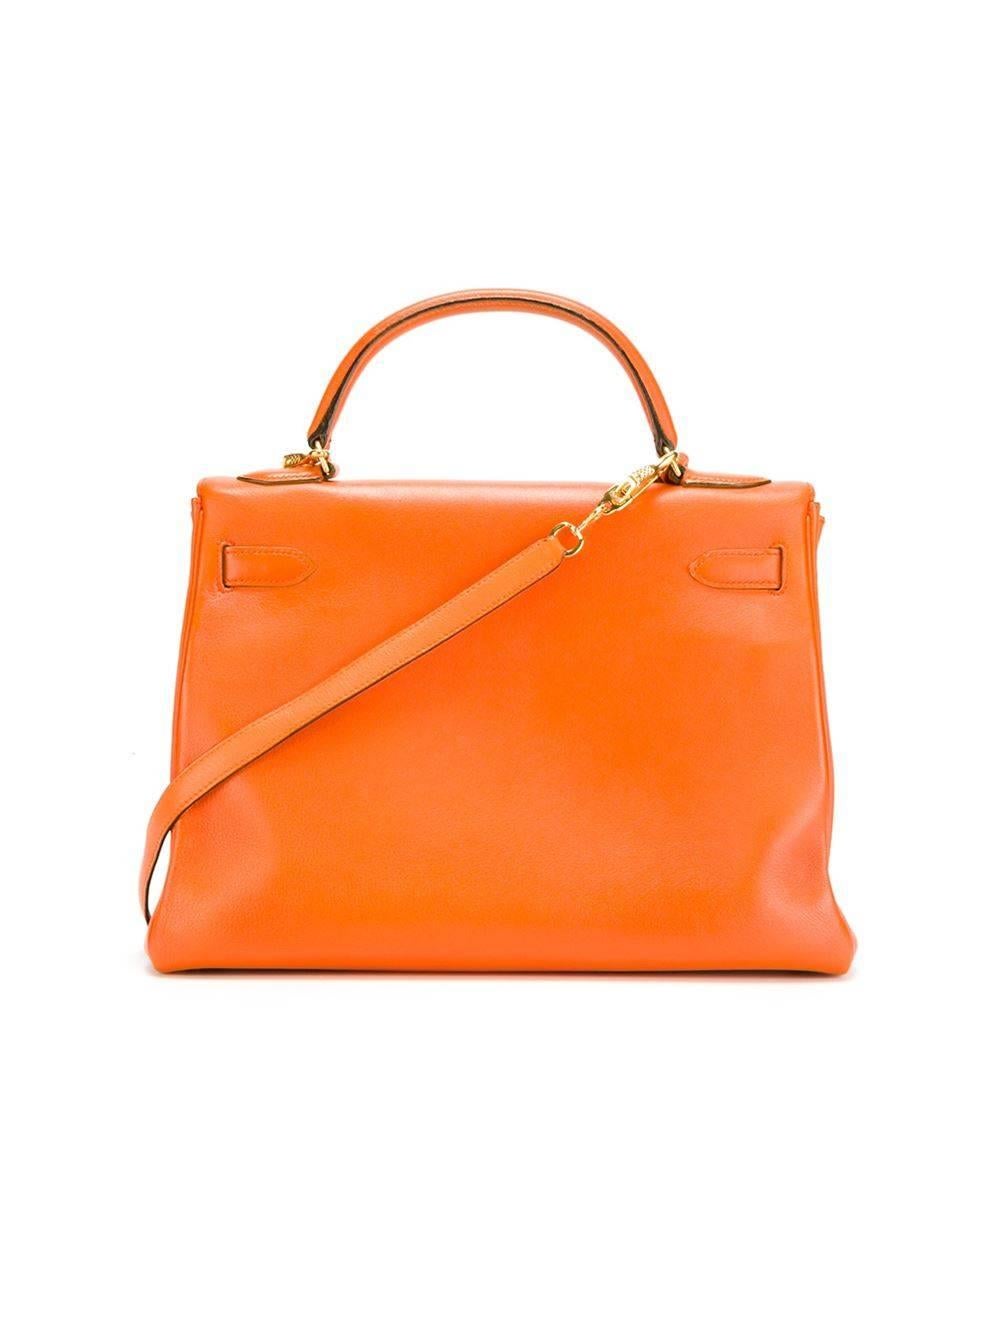 Hermes Orange 32cm Kelly Bag In Excellent Condition In London, GB